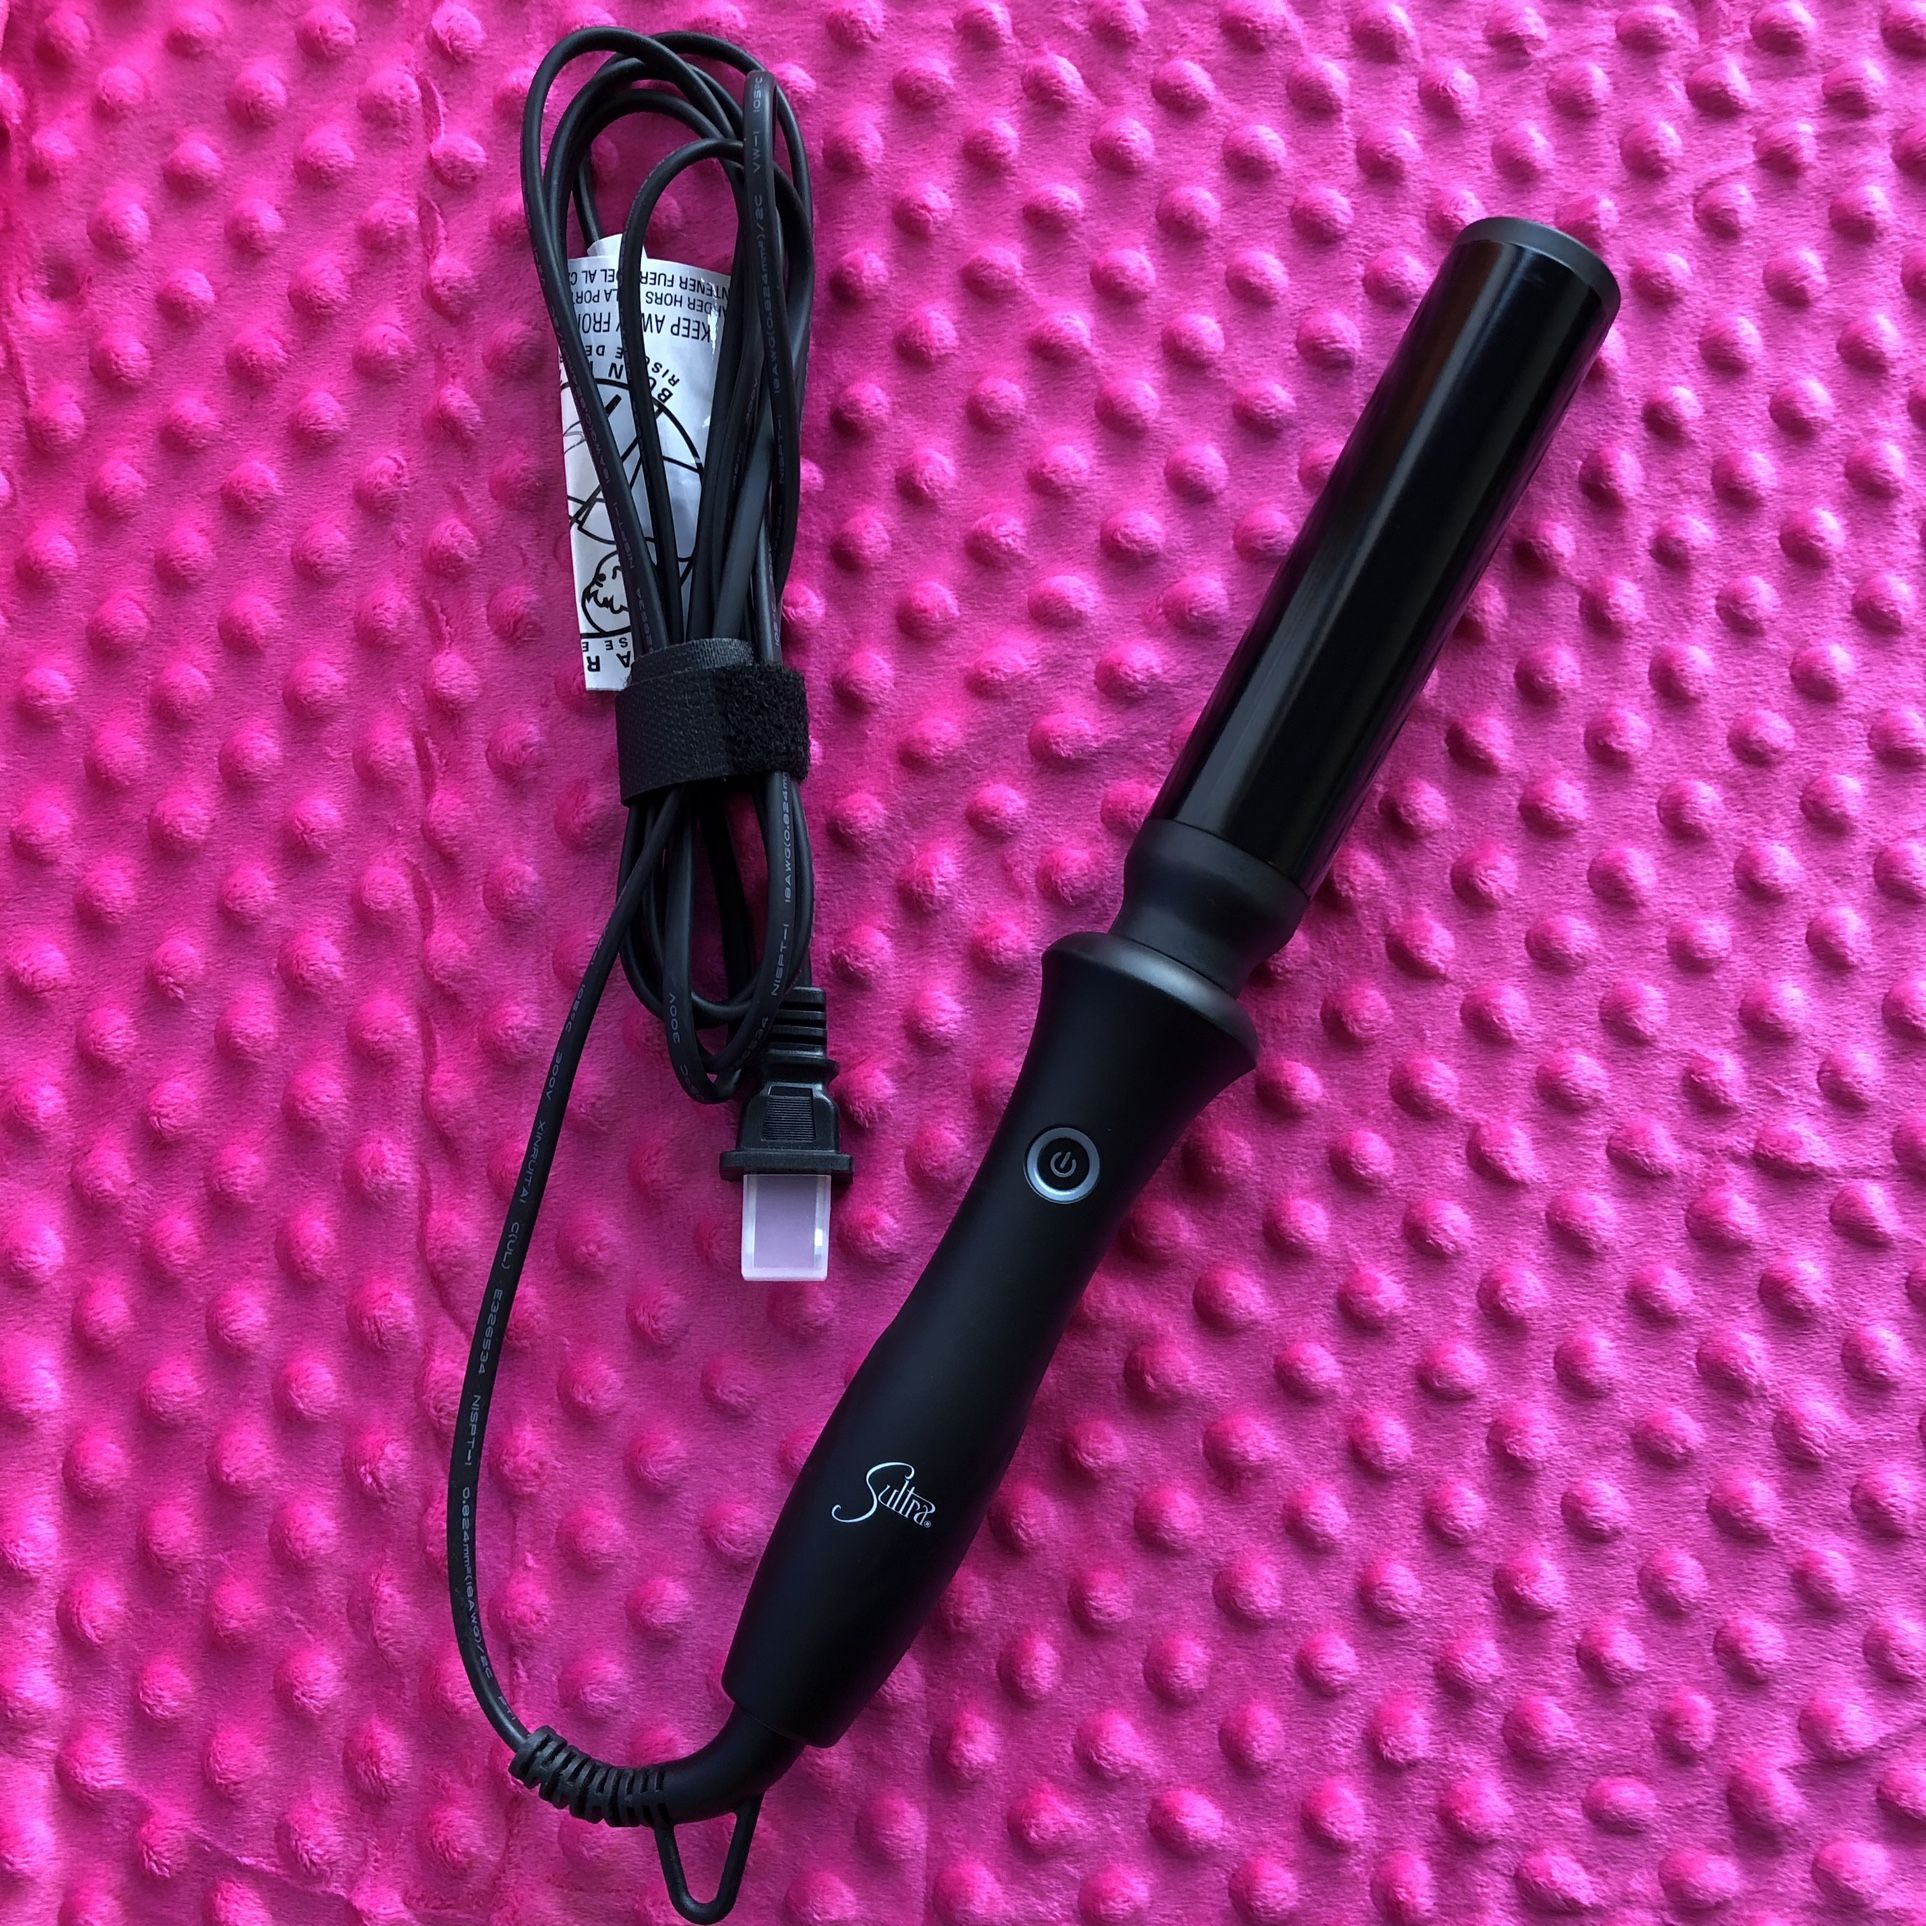 Sultra 1.5” Curling Wand